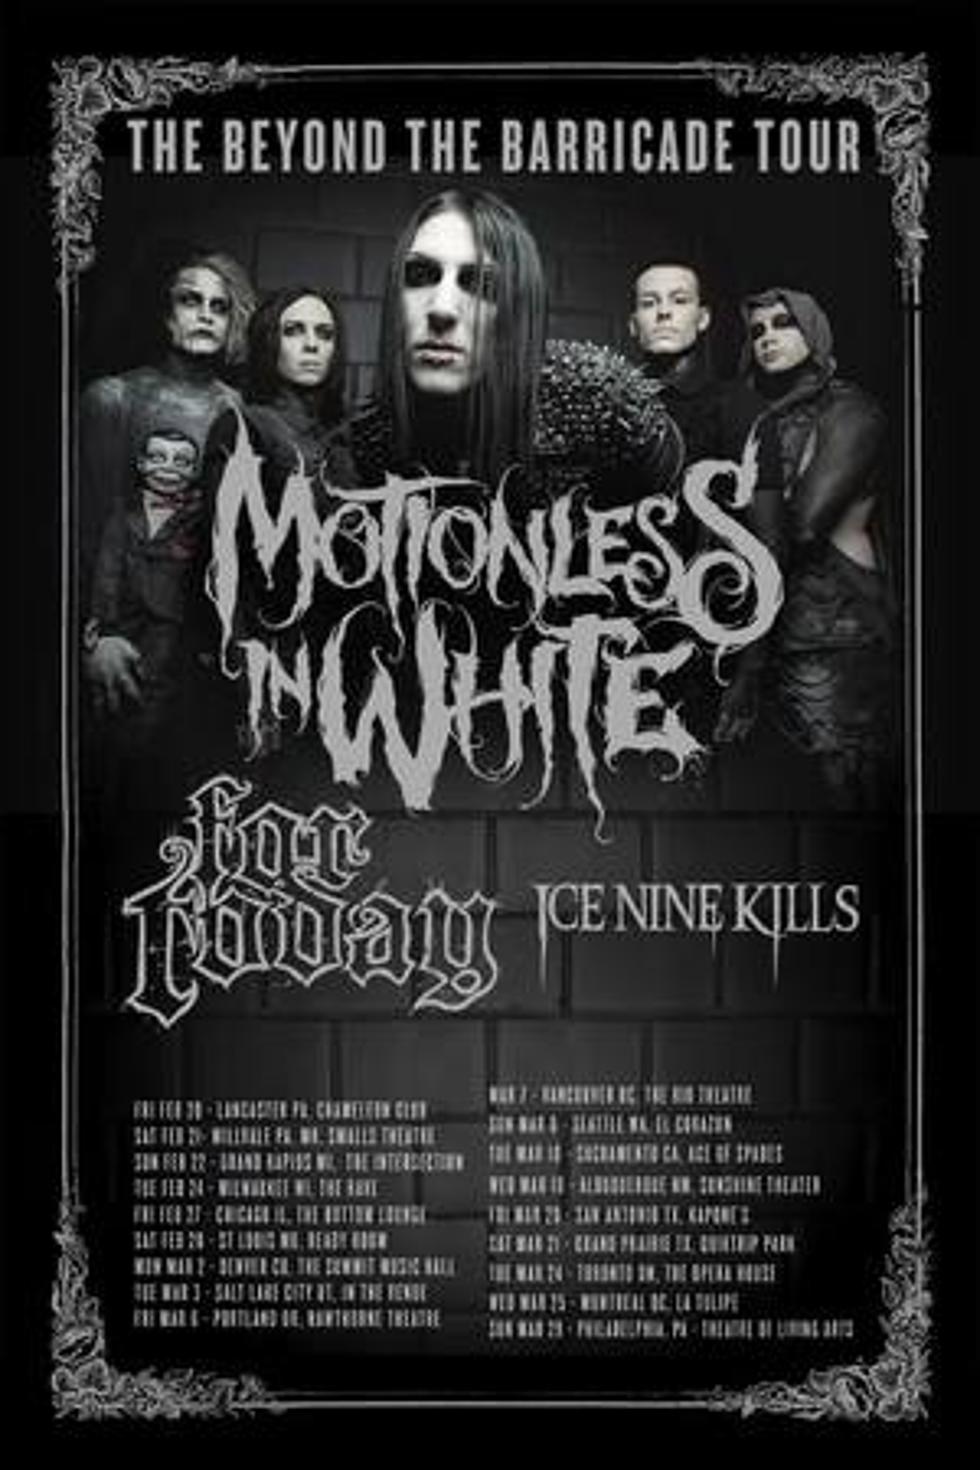 Motionless in White Brings Beyond the Barricade Tour to The Intersection on Feb. 22